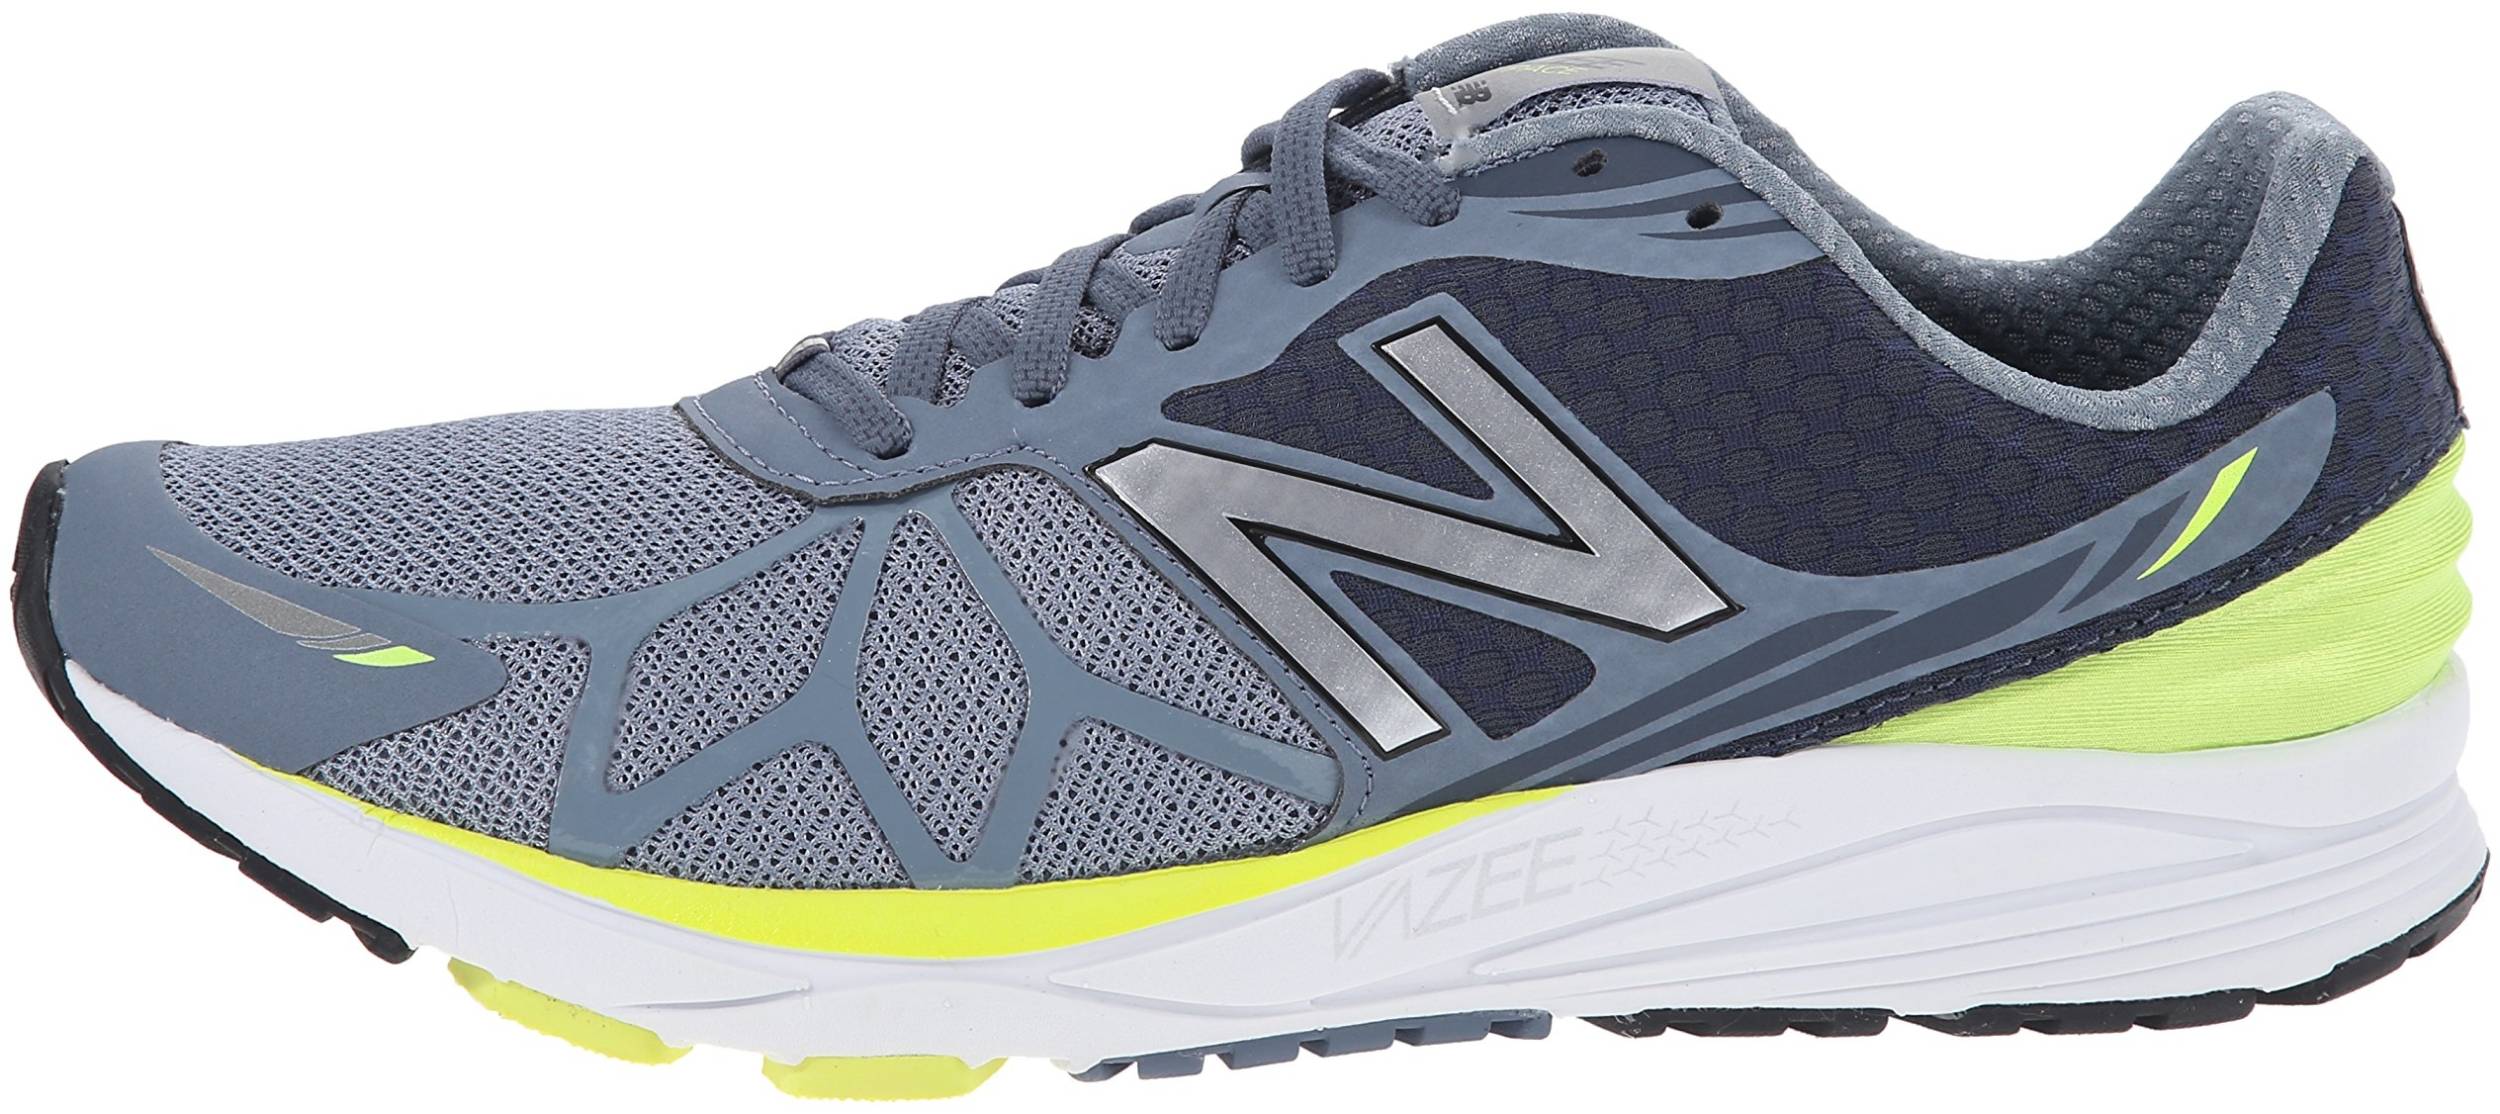 New Balance Vazee Pace Review 2021 